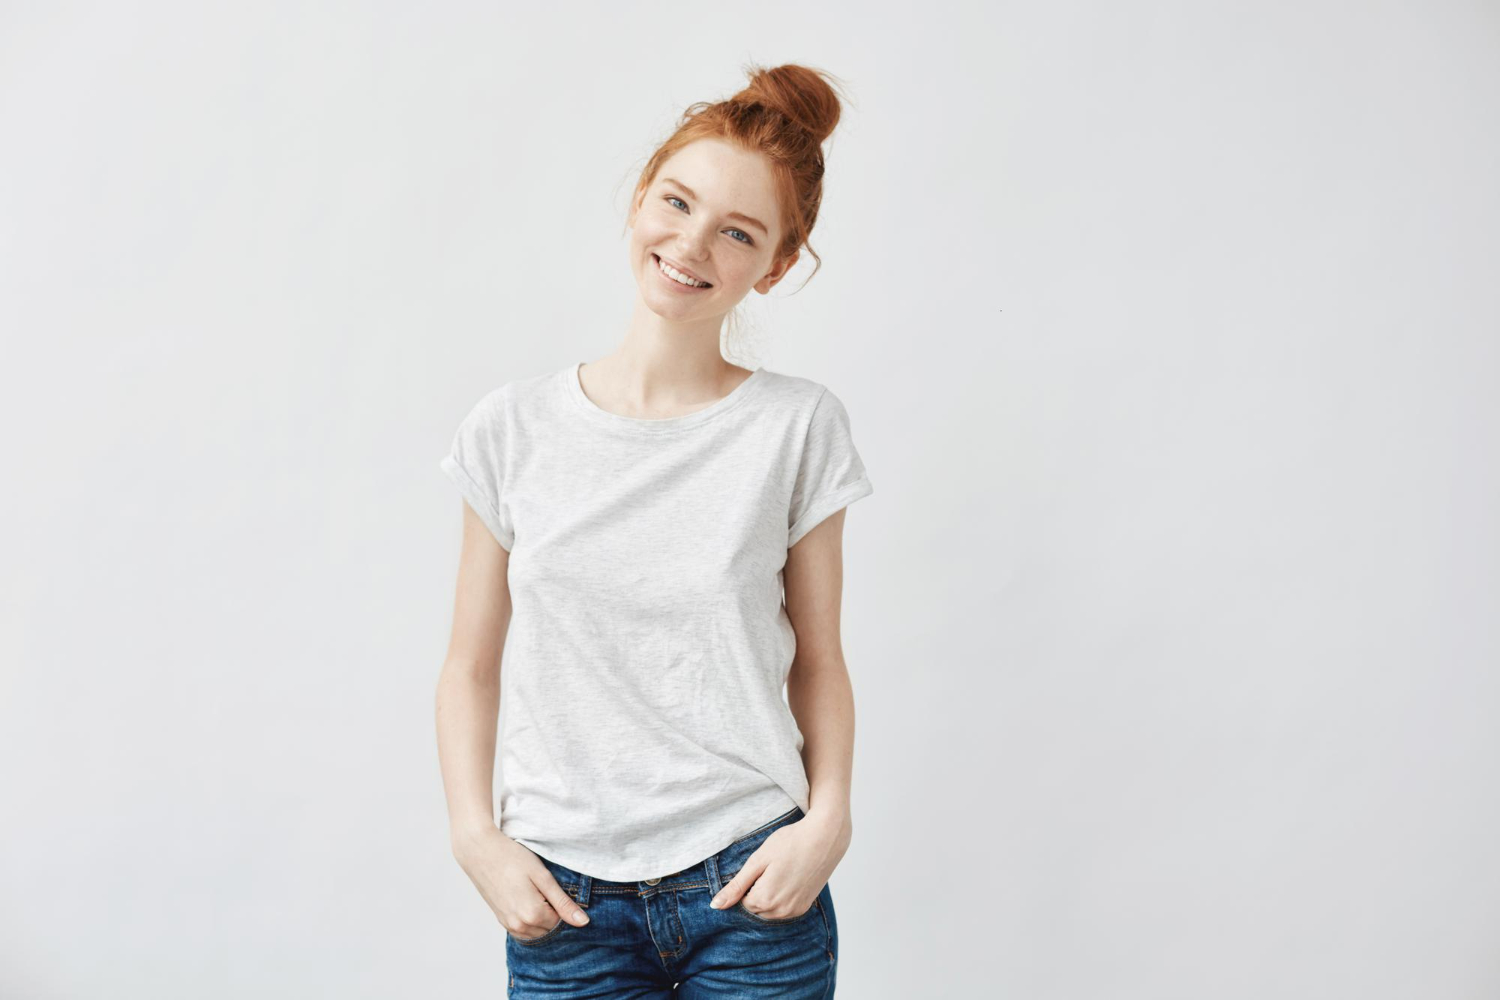 young attractive redhead girl smiling looking camera isolated white